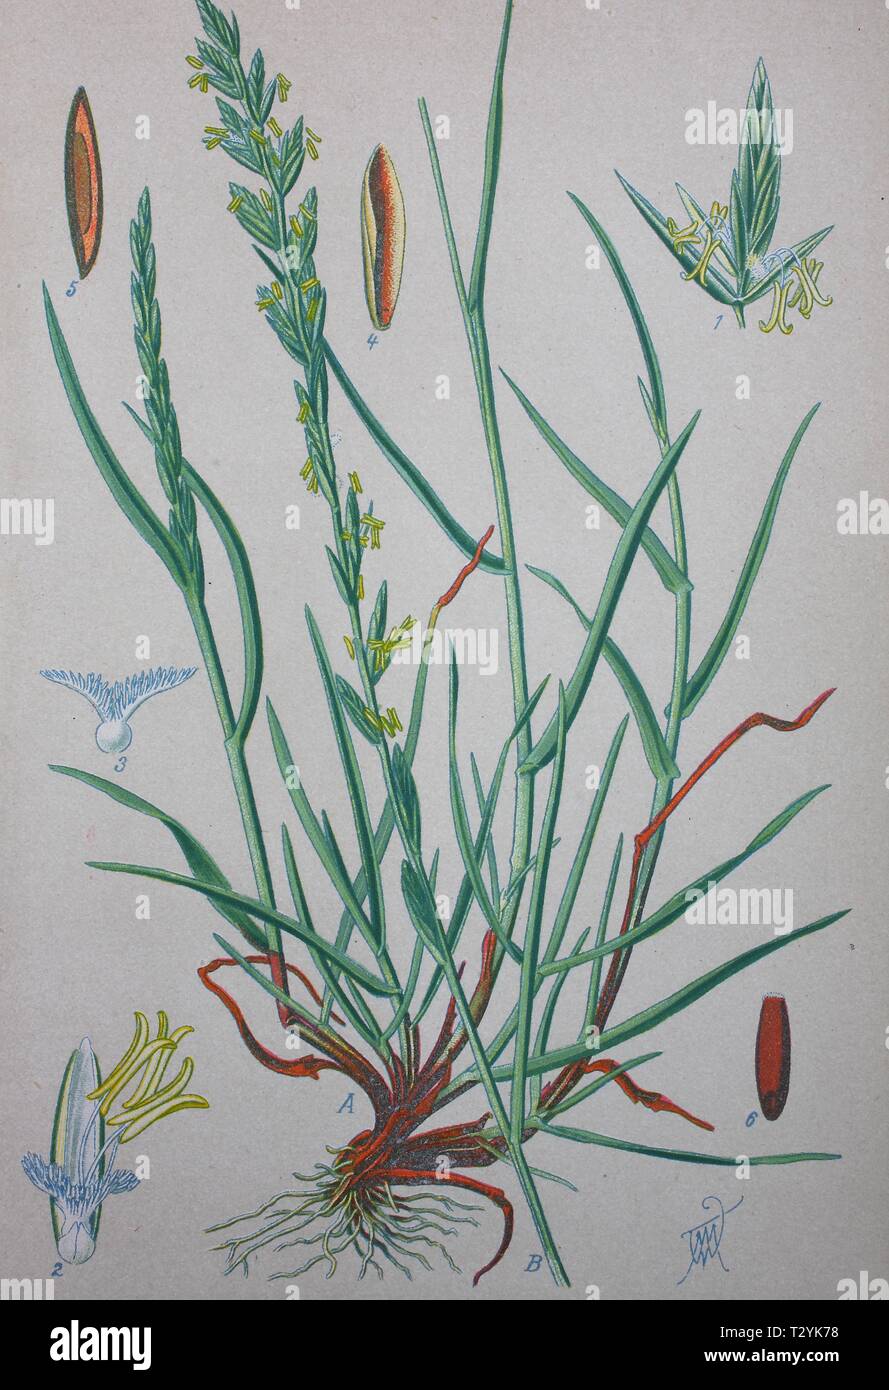 Perennial ryegrass (Lolium perenne), historical illustration from 1885, Germany Stock Photo